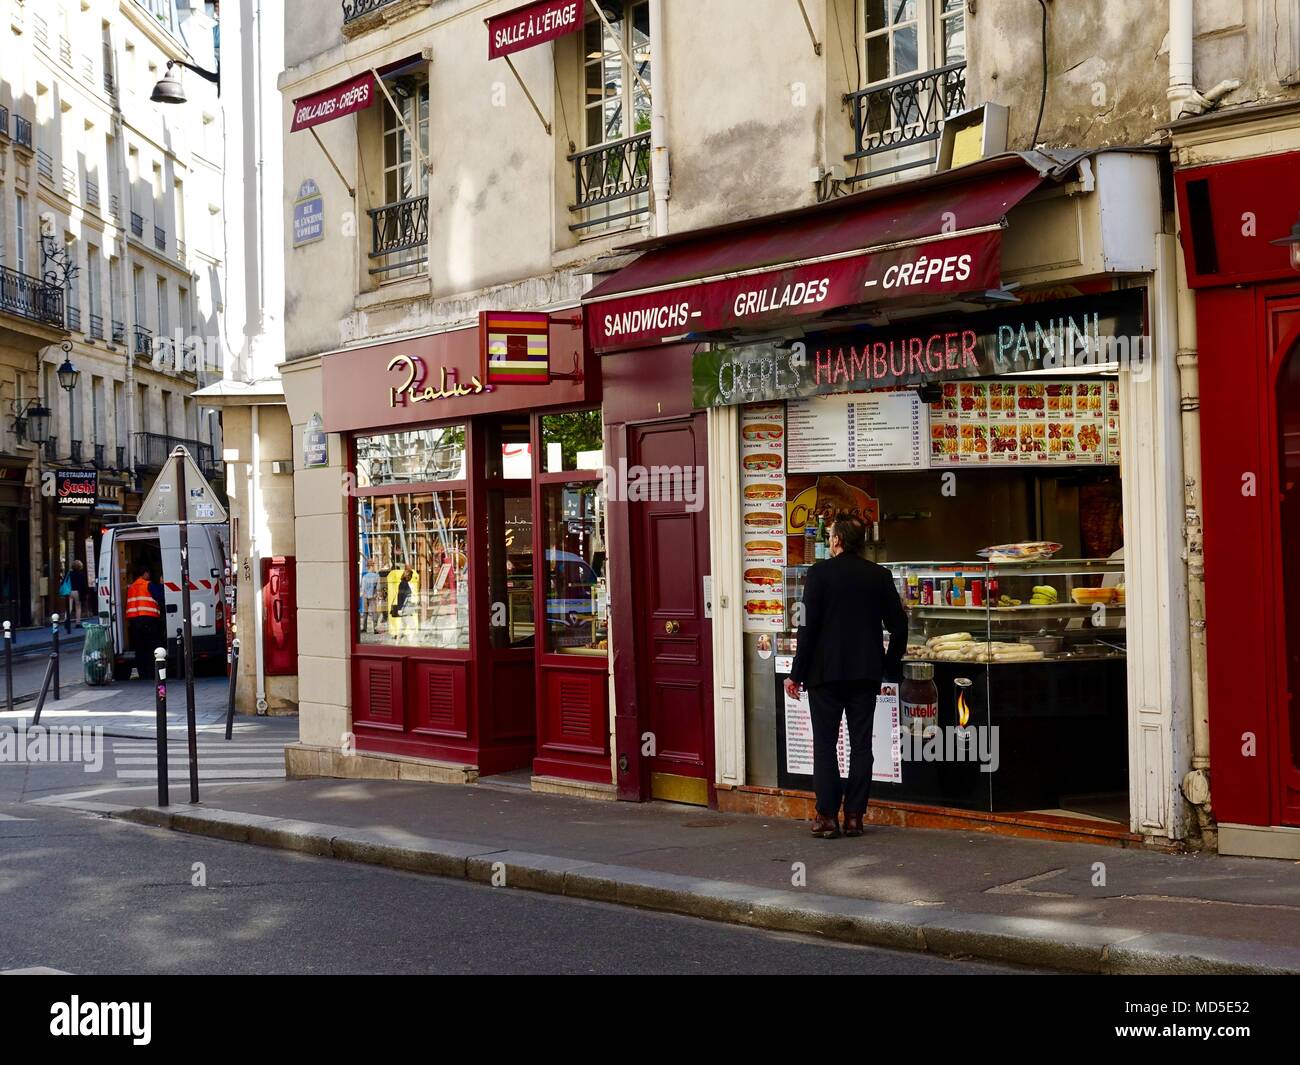 Man standing outside food shop featuring sandwiches, grilles, crepes, hamburgers, and panini in the 6th district, Paris, France Stock Photo